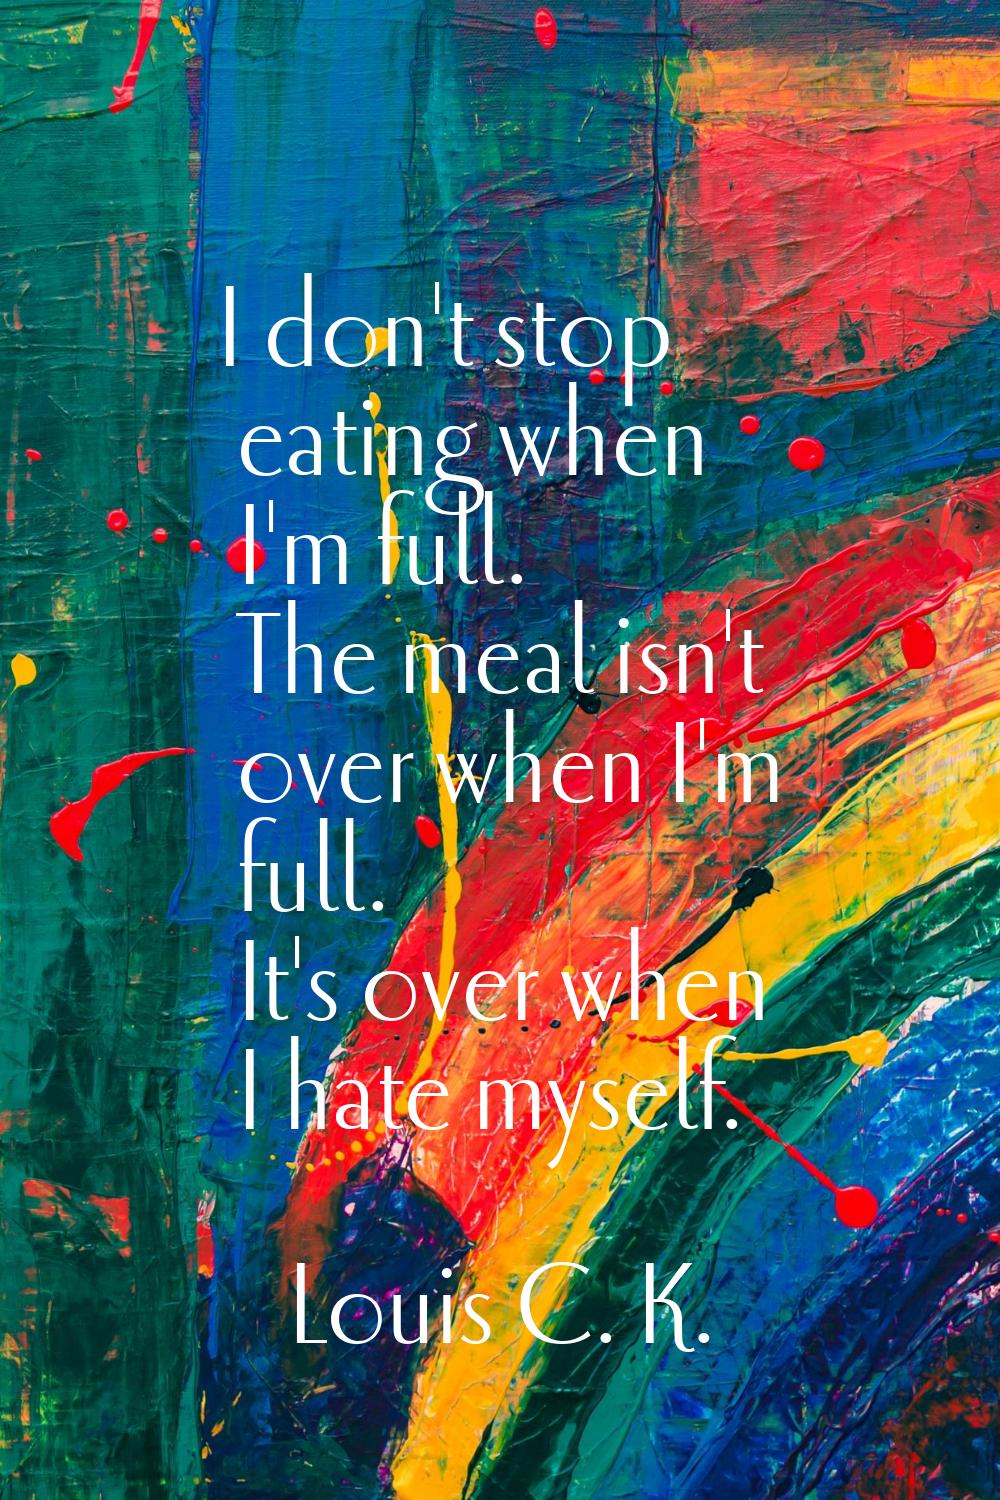 I don't stop eating when I'm full. The meal isn't over when I'm full. It's over when I hate myself.